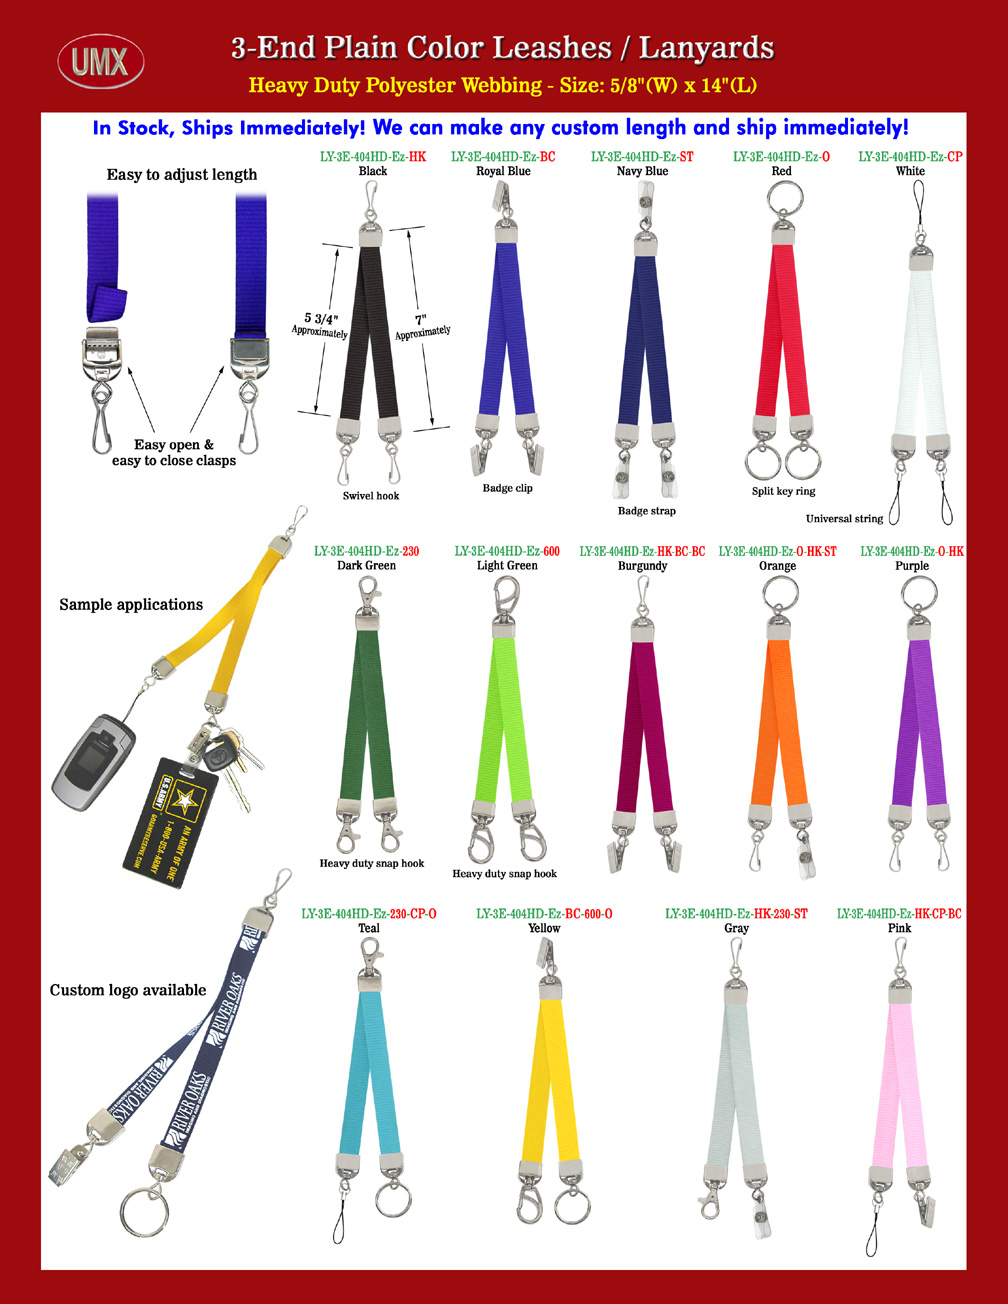 We keep 14 color of high quality lanyard strap in stock, any custom length and custom hardware attachment can be made right away according to your specific requirement.